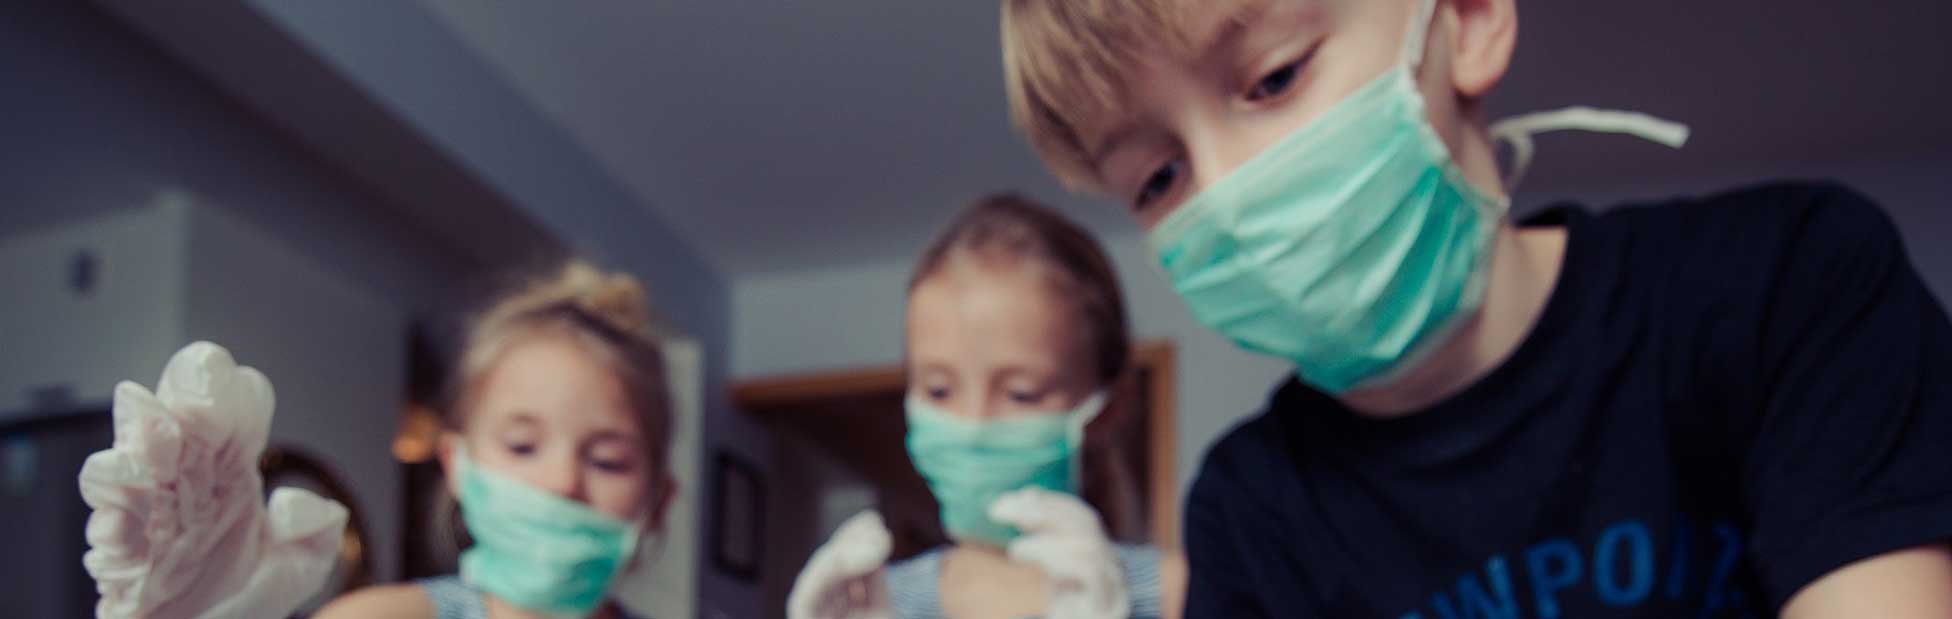 Children wearing medical masks looking a toy doll